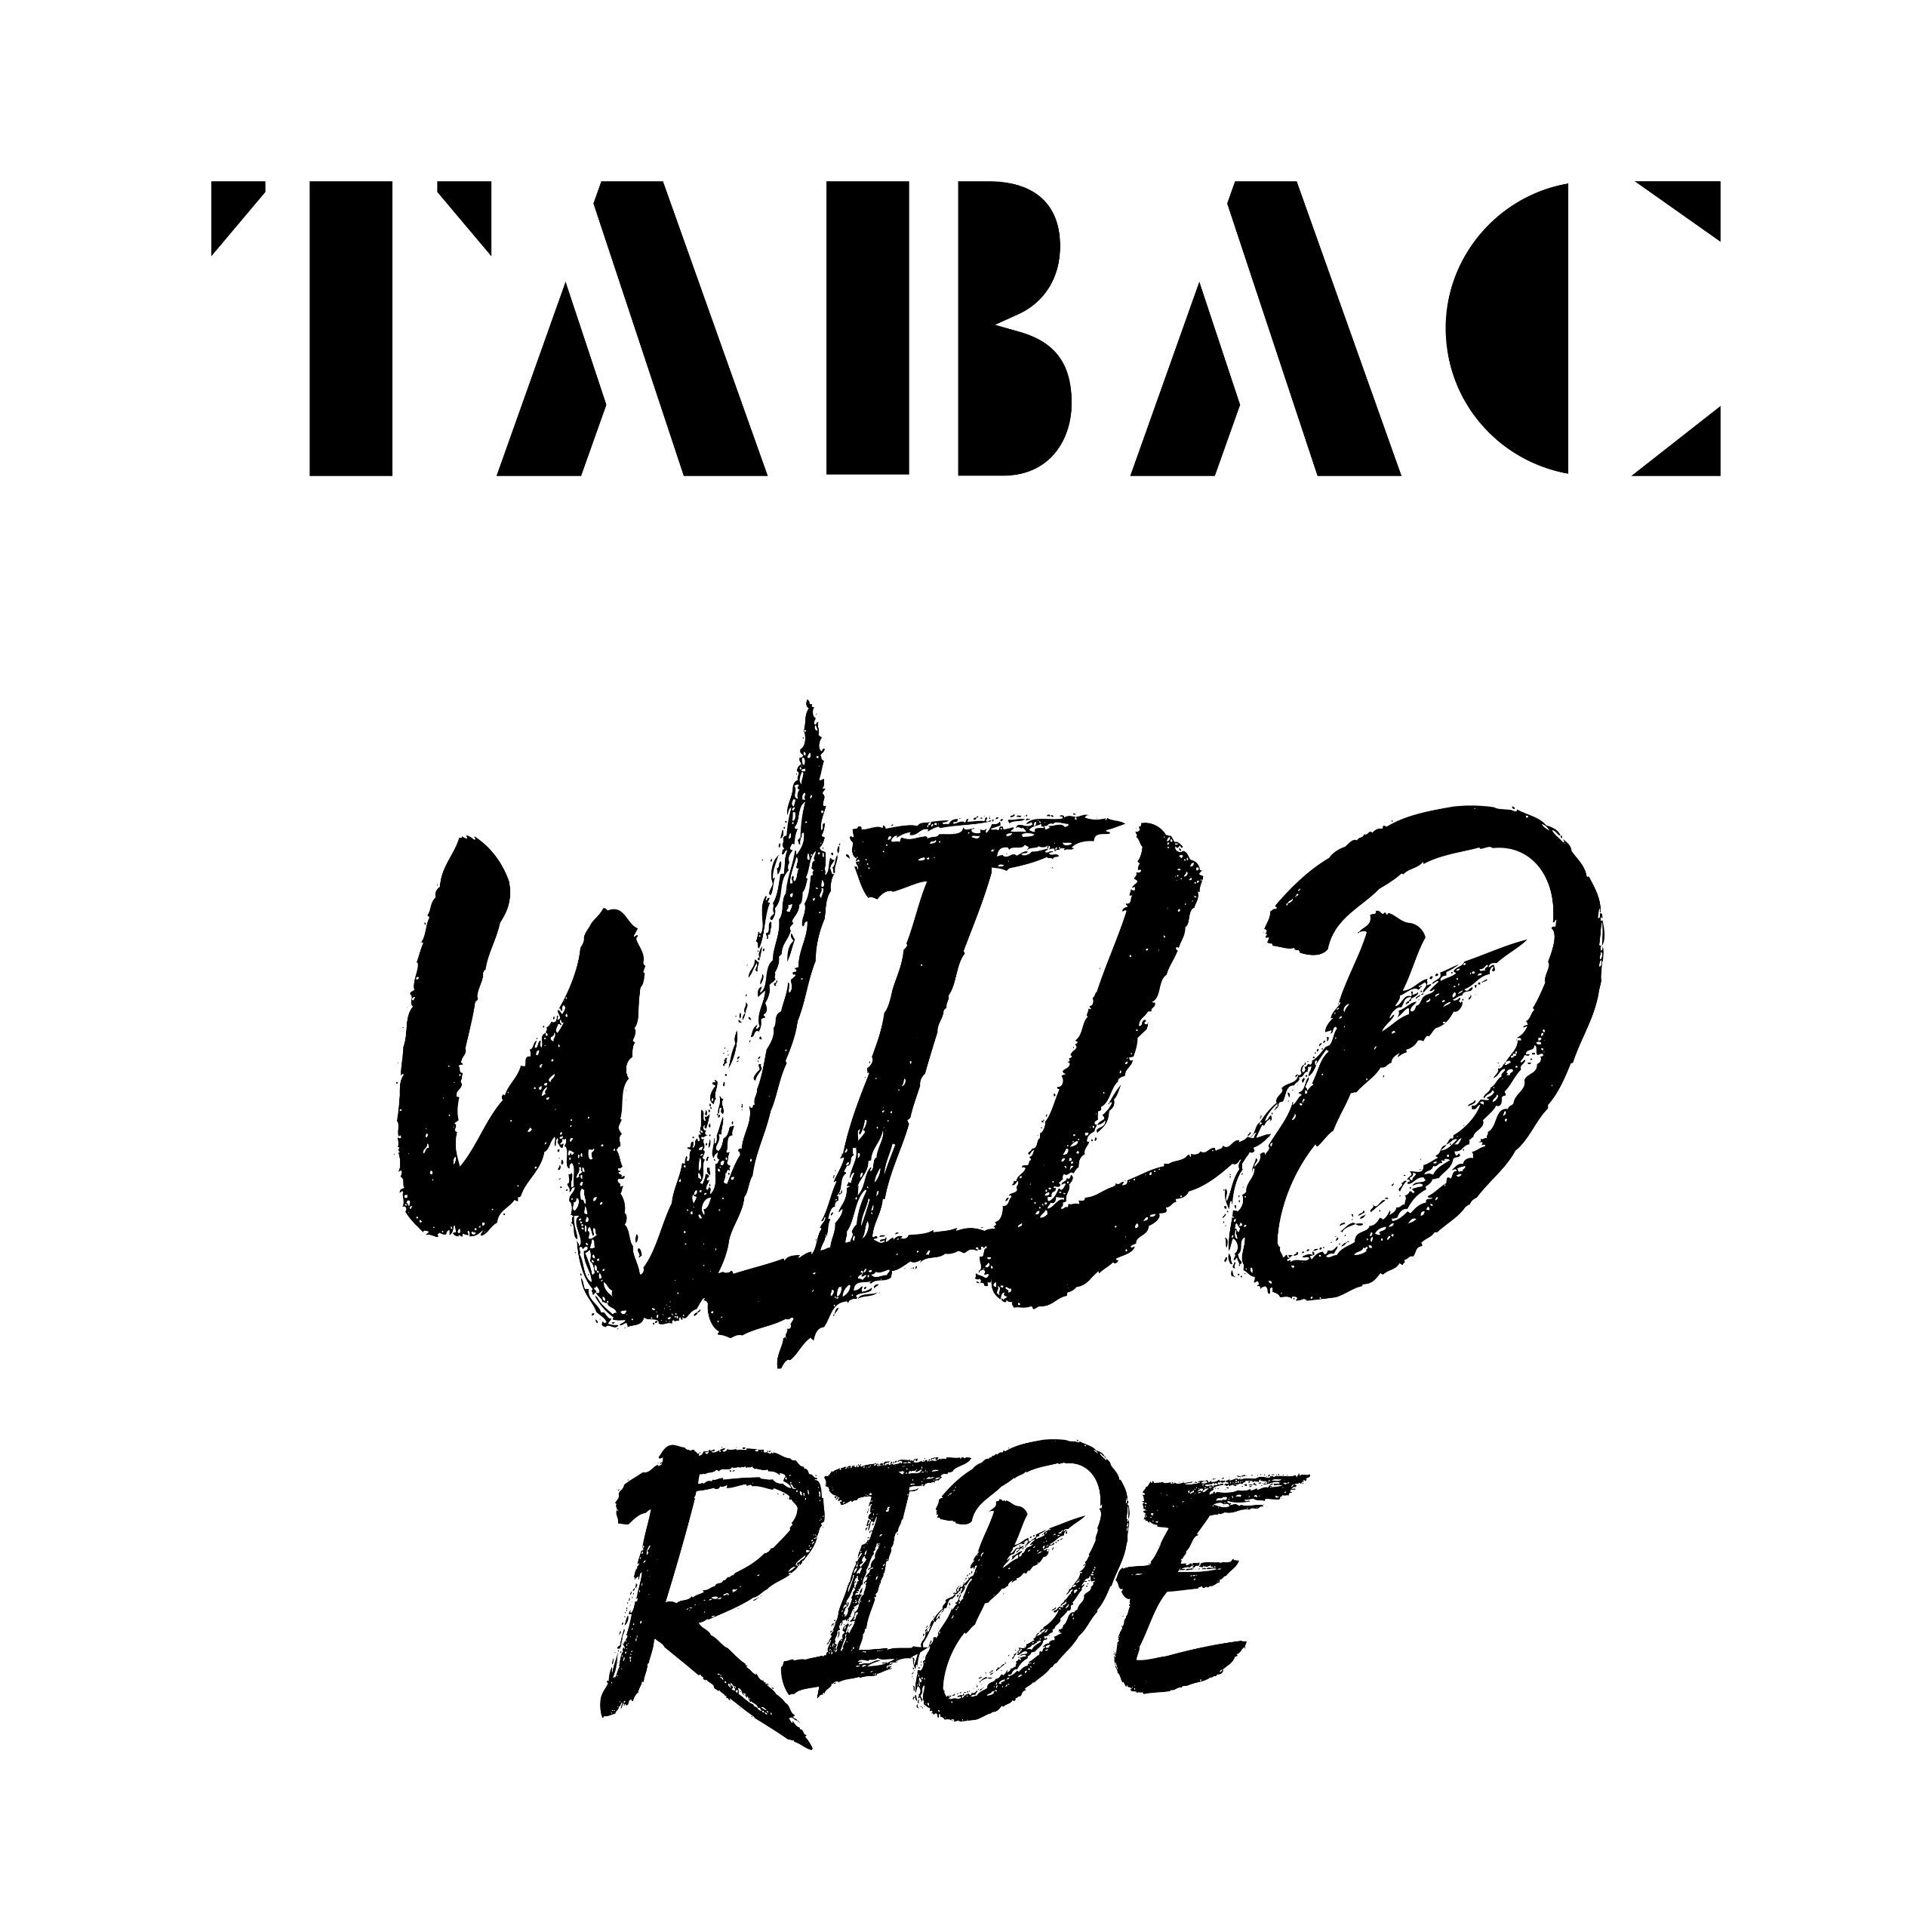 After Shave Ride Wild ml 125 Tabac Tabac Ride Lotion Gesichts-Reinigungslotion Wild